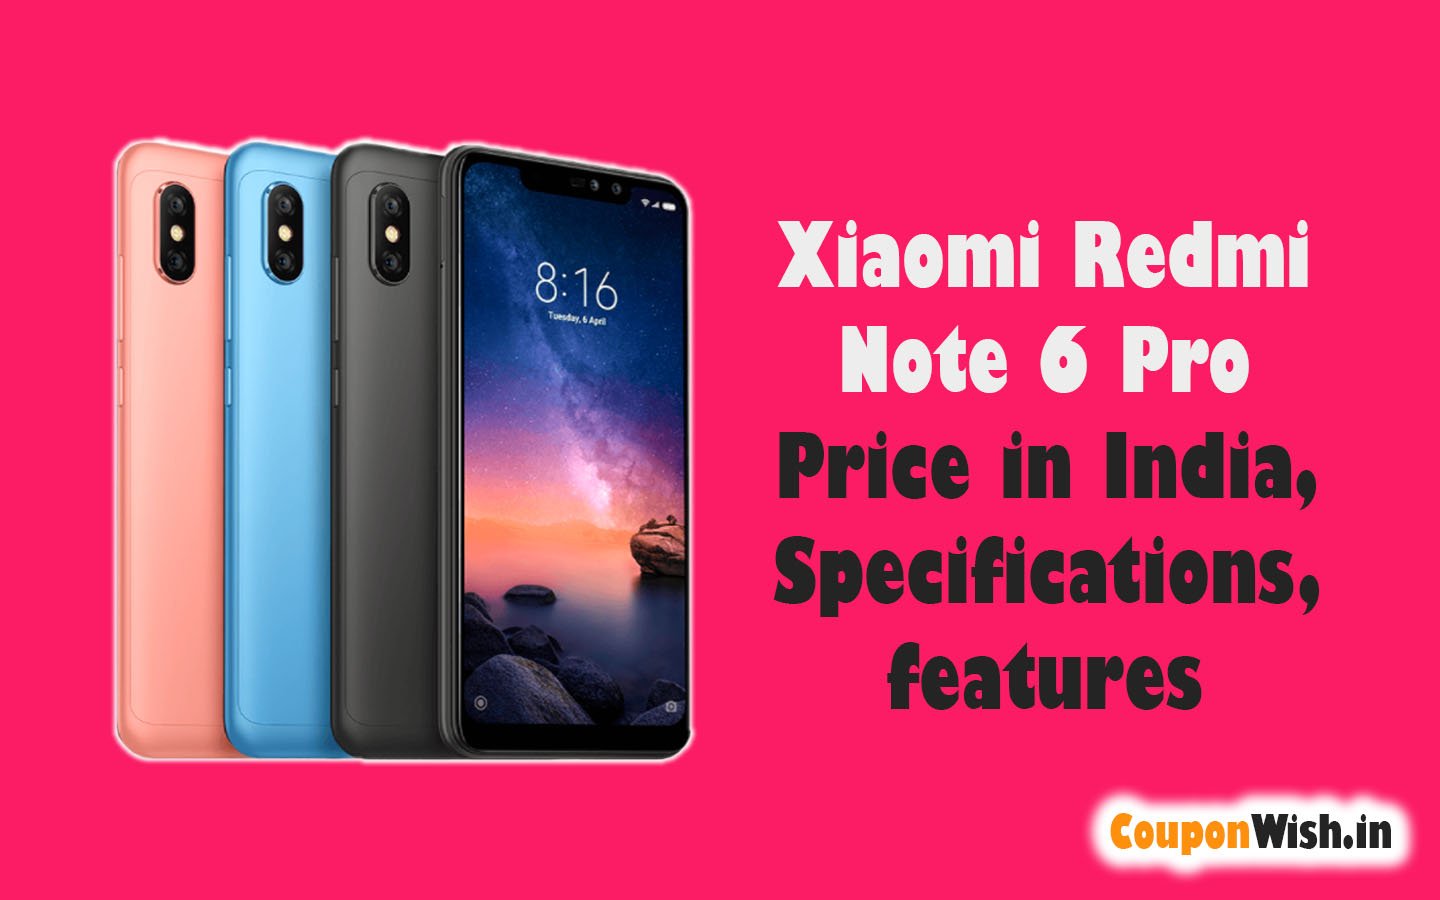 Xiaomi Redmi Note 6 Pro Price in India, Specifications, features